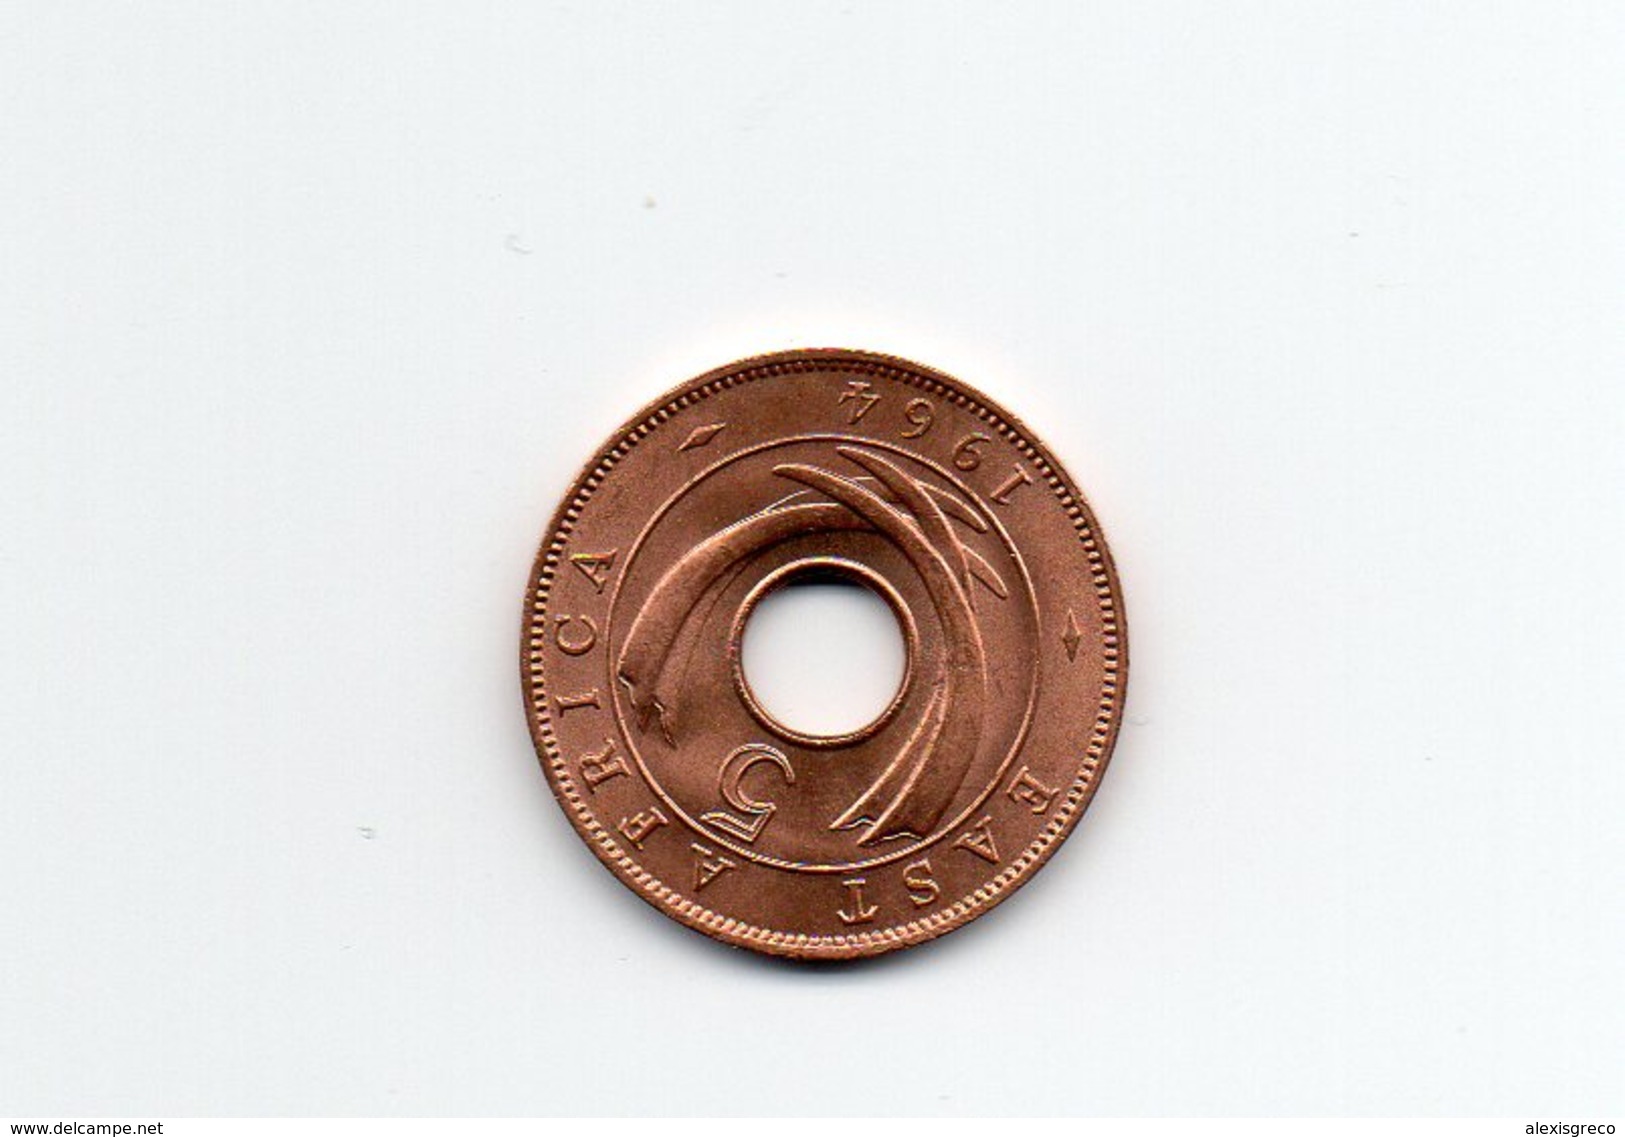 BRITISH EAST AFRICA 1964 UNCIRCULATED COIN FIVE CENTS BRONZE (Post-Independence Issue). - Britse Kolonie